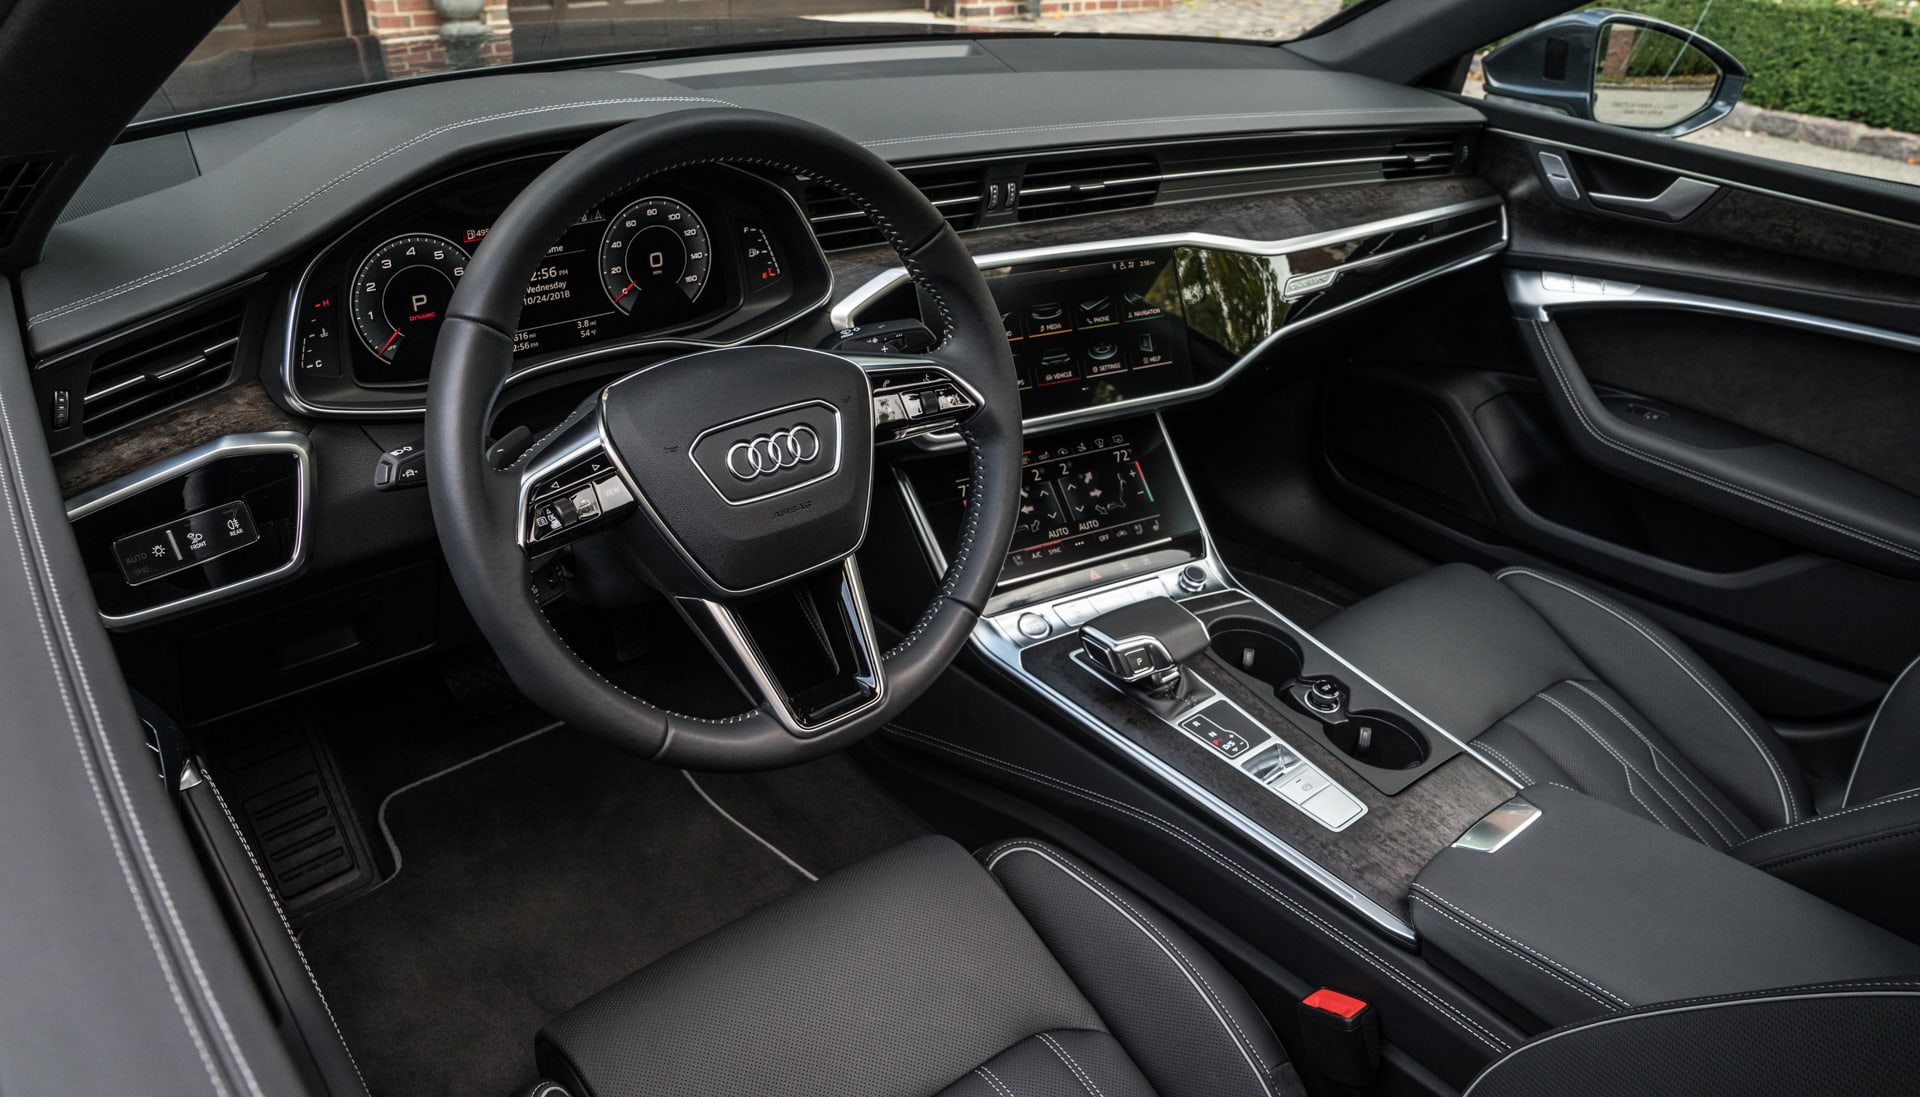 Audi bets you'll pay extra for the A7's design and tech upgrades | Engadget